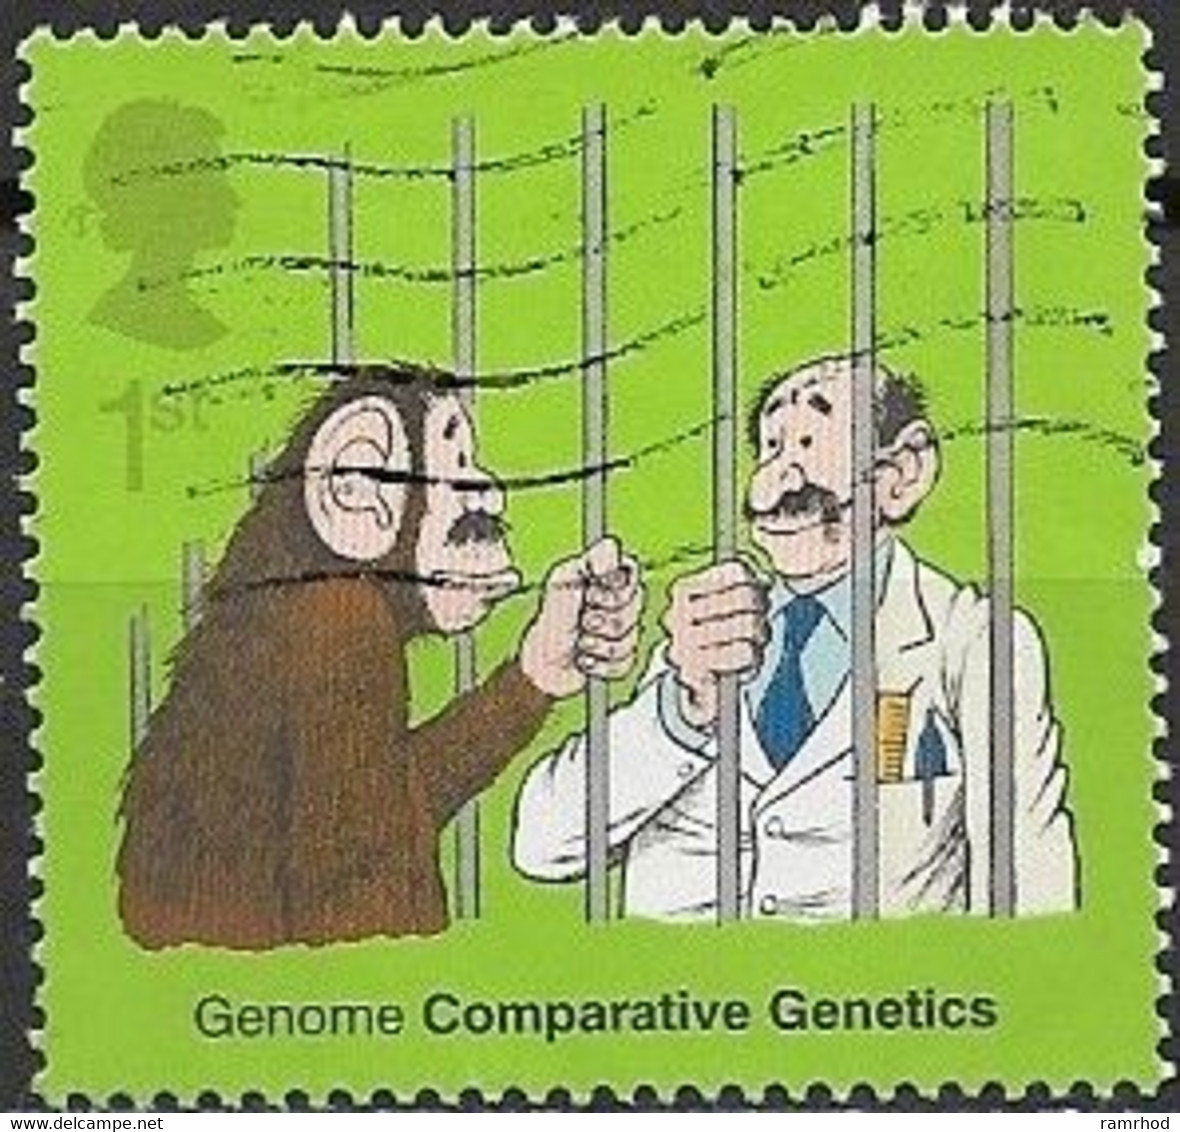 GREAT BRITAIN 2003 50th Anniversary Of Discovery Of DNA - (1st) - Ape With Moustache And Scientist FU - Zonder Classificatie